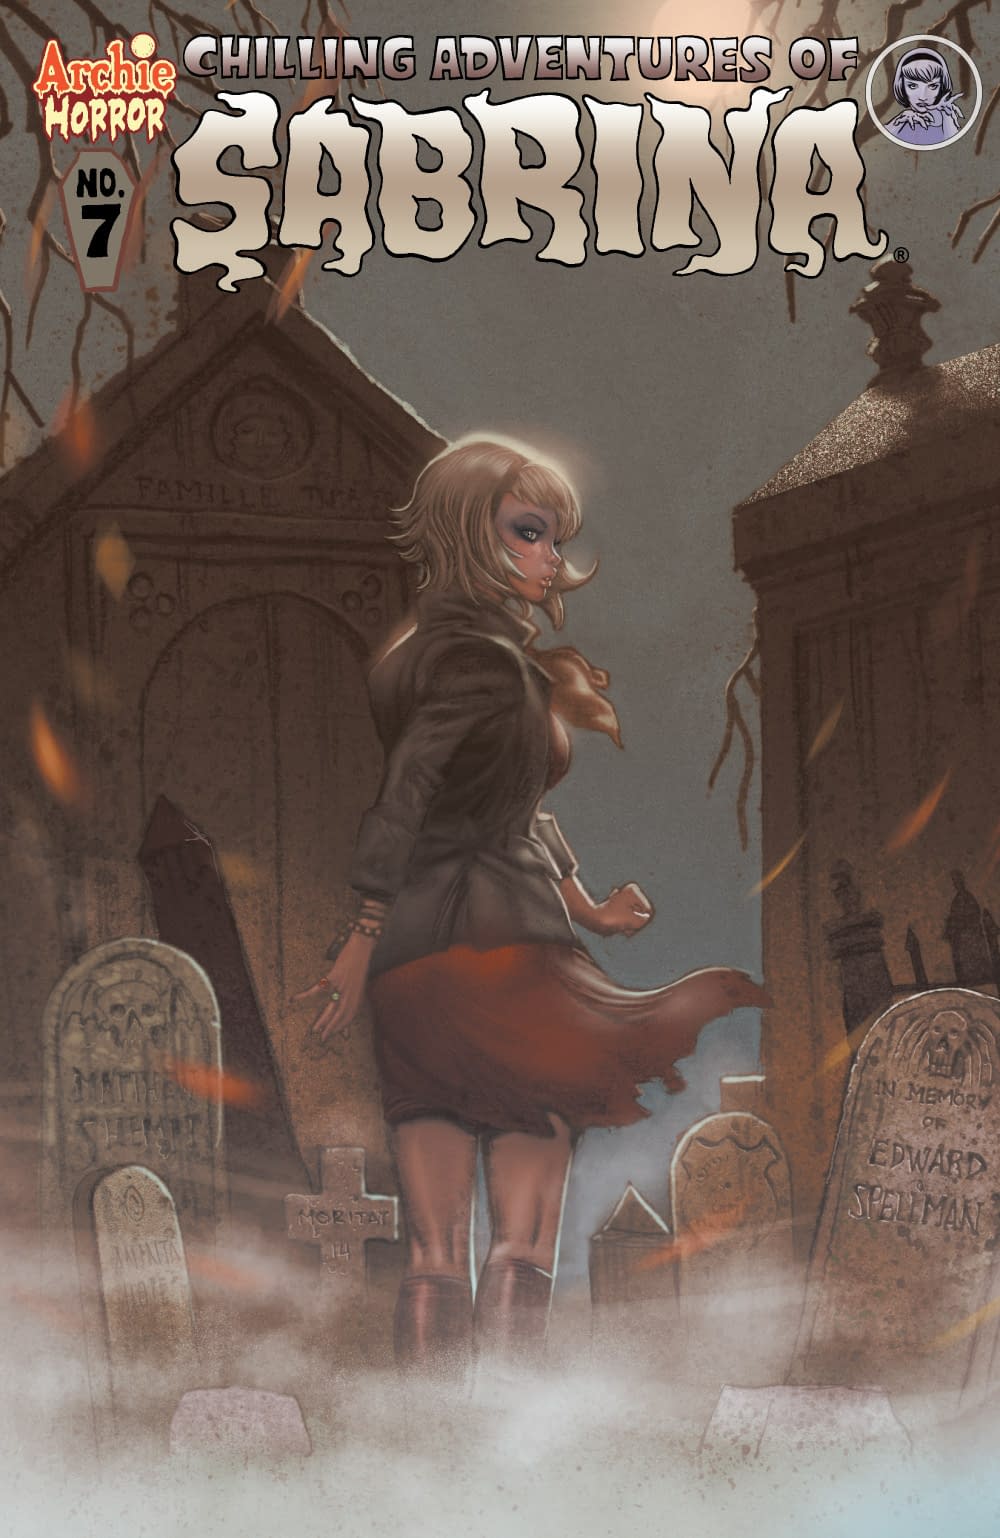 Check Out This 'The Chilling Adventures Of Sabrina #7' Preview; Issue In Stores Tomorrow